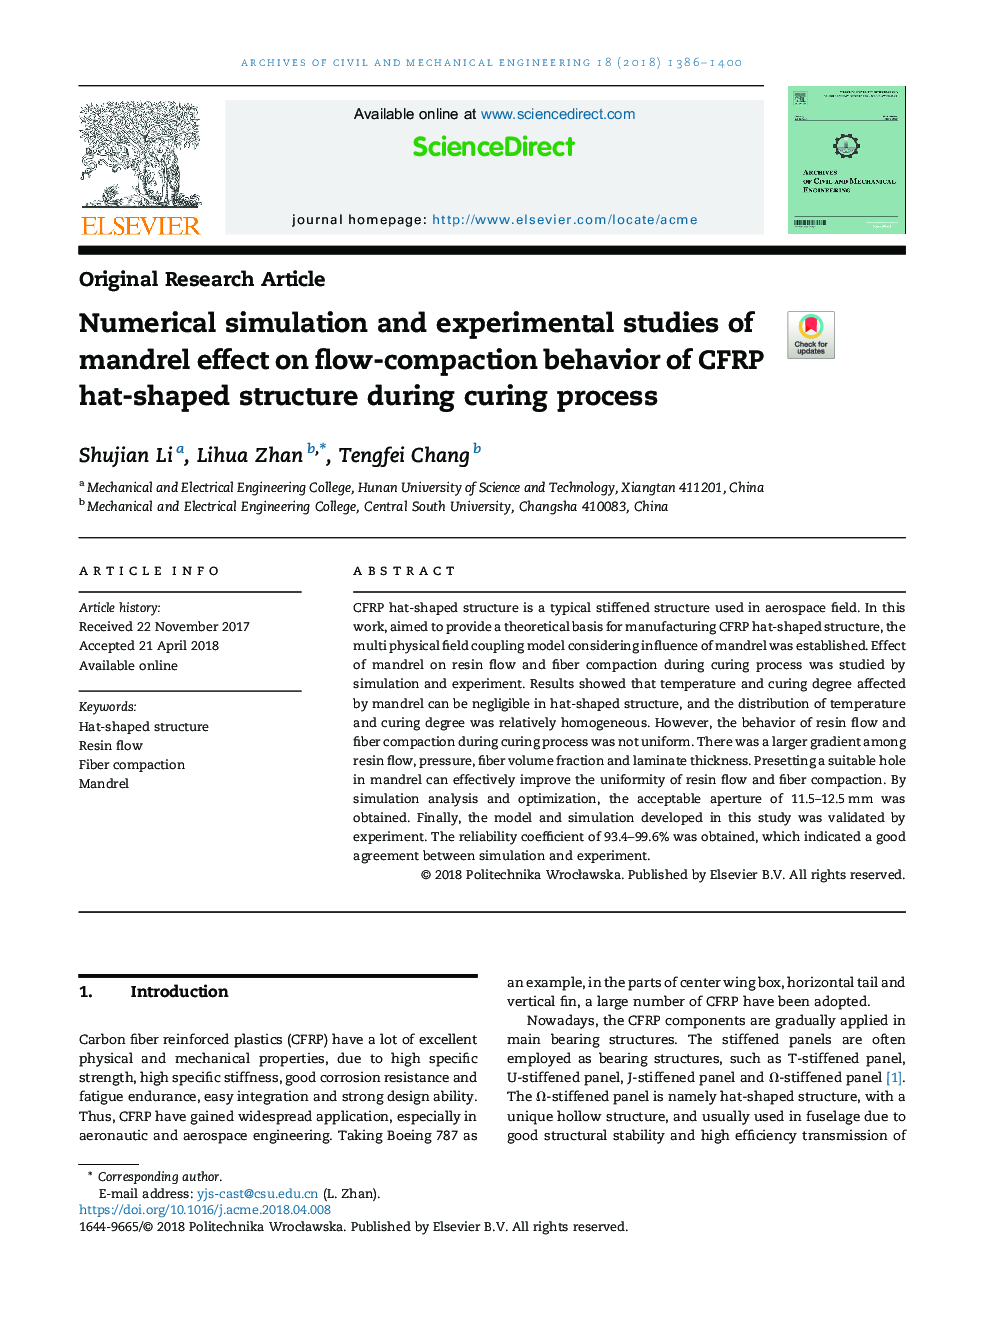 Numerical simulation and experimental studies of mandrel effect on flow-compaction behavior of CFRP hat-shaped structure during curing process